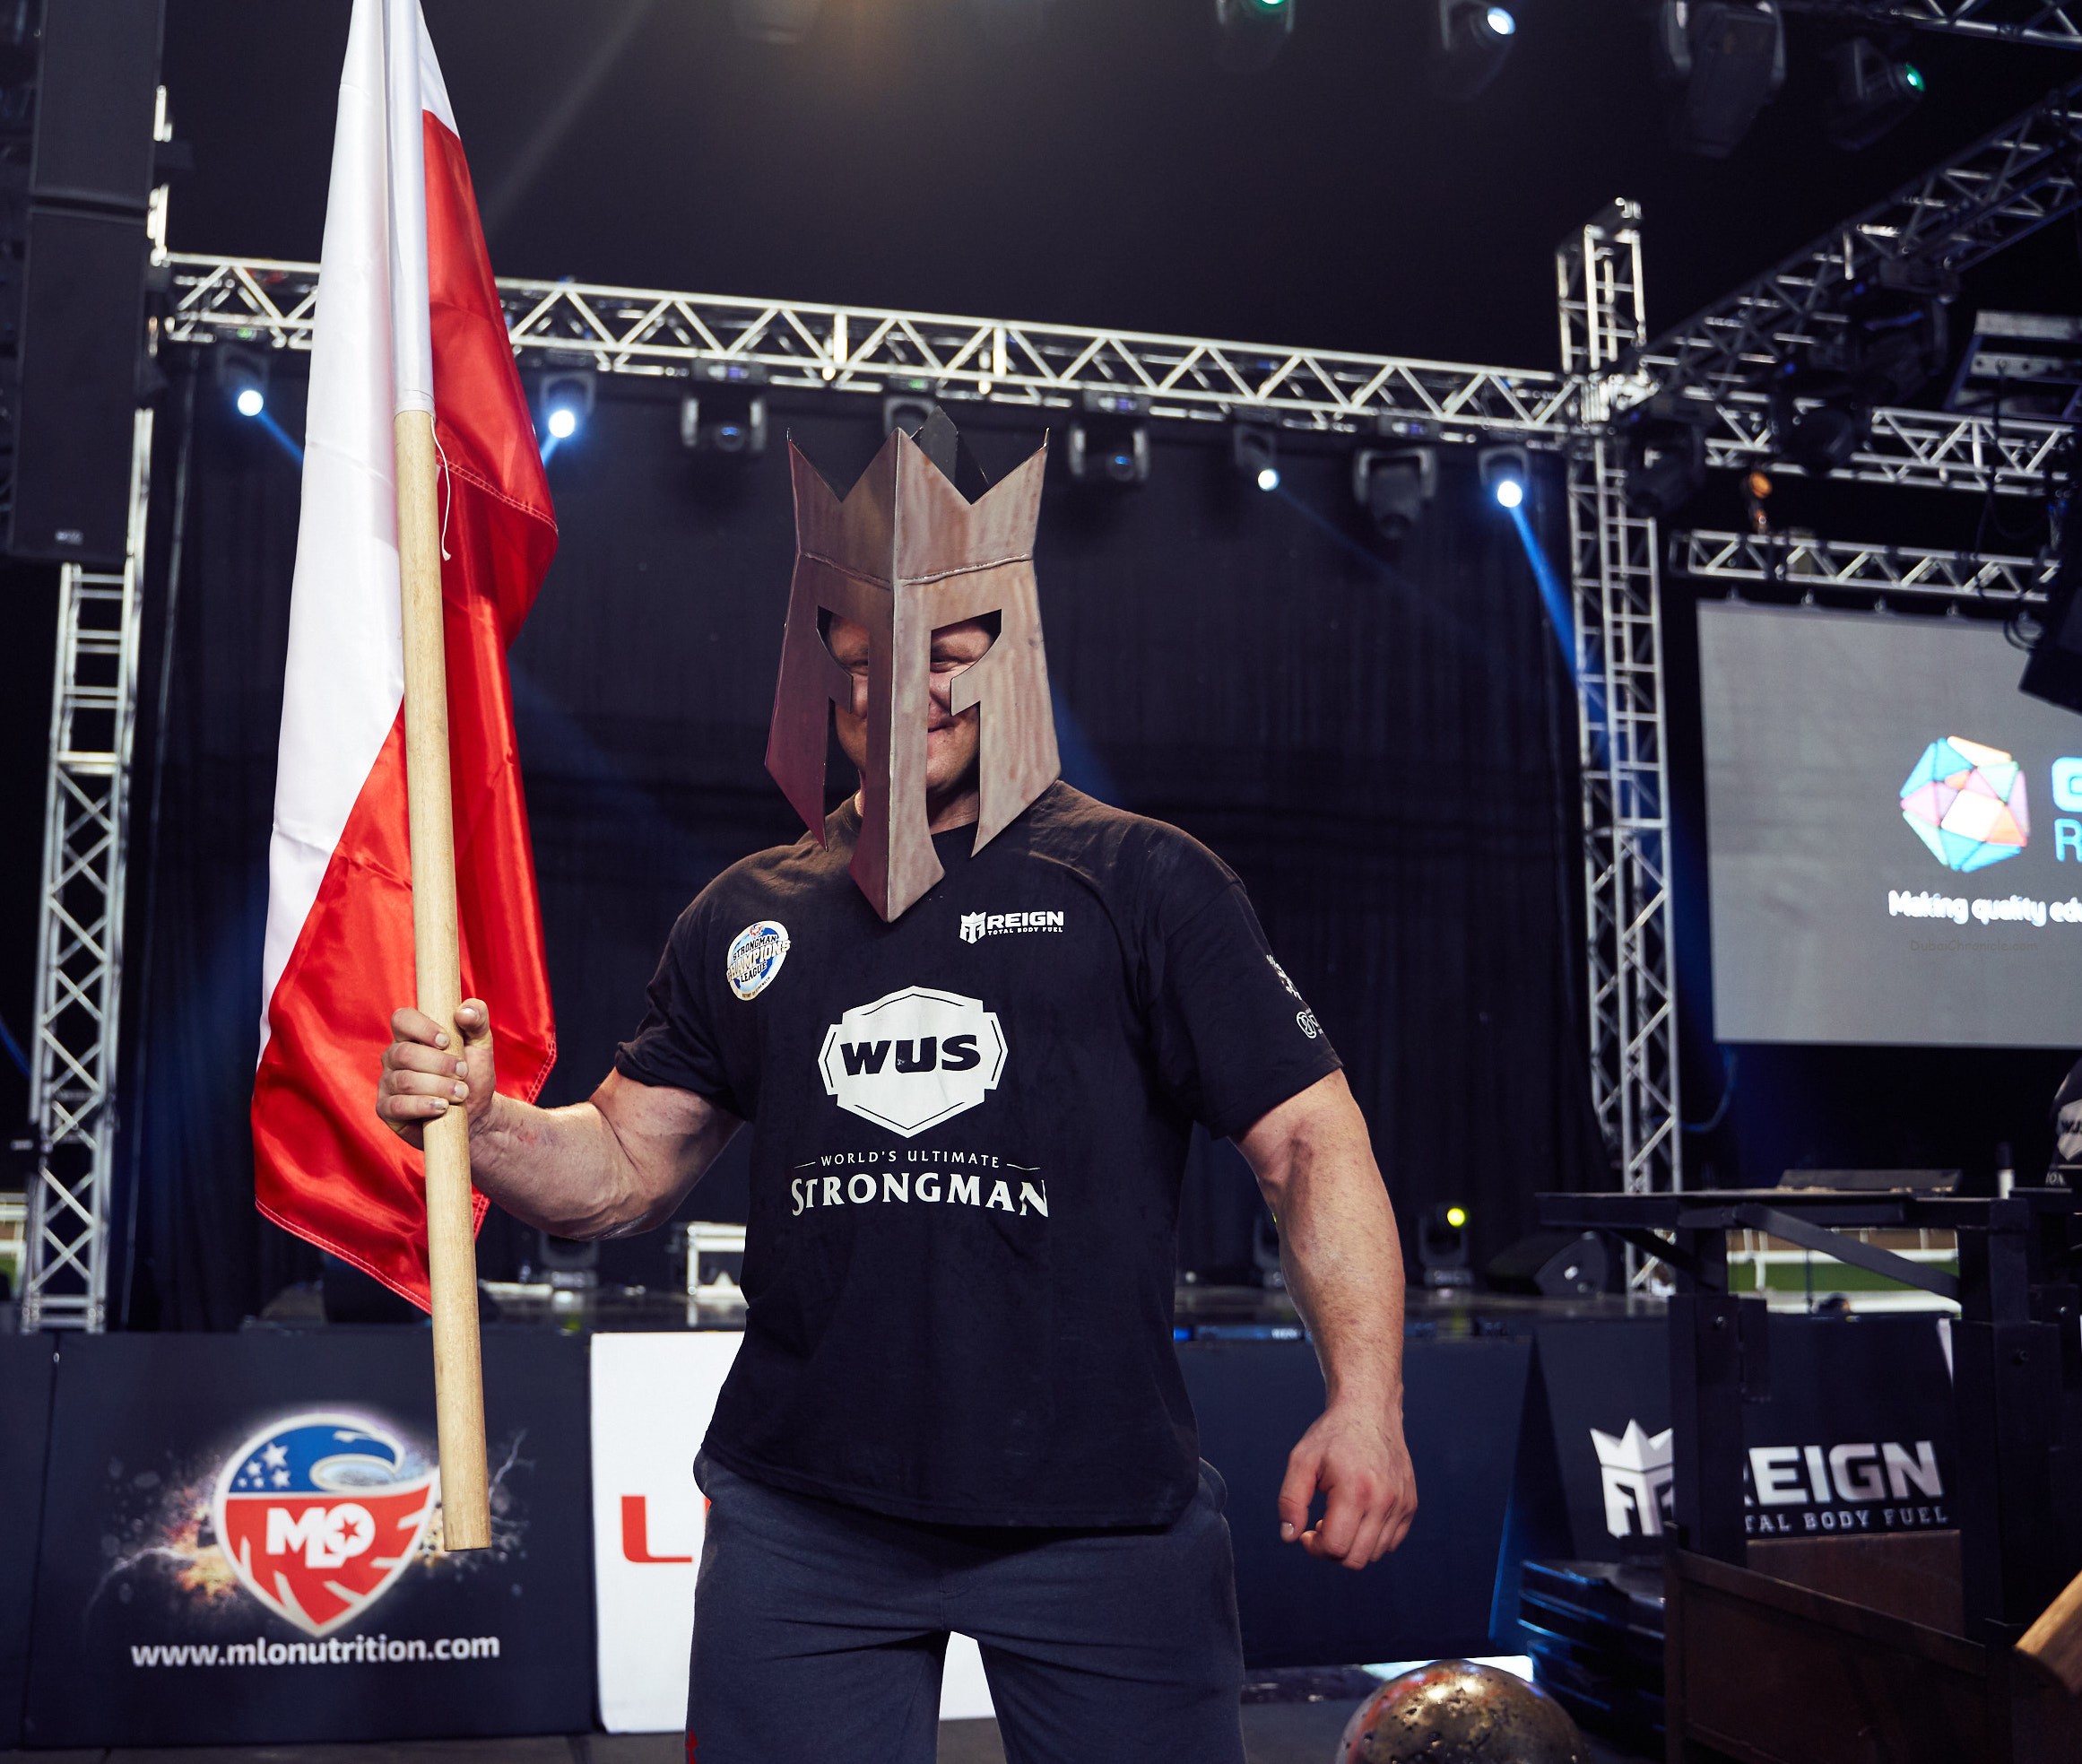 World’s Ultimate Strongman Comes to a Recordbreaking Close